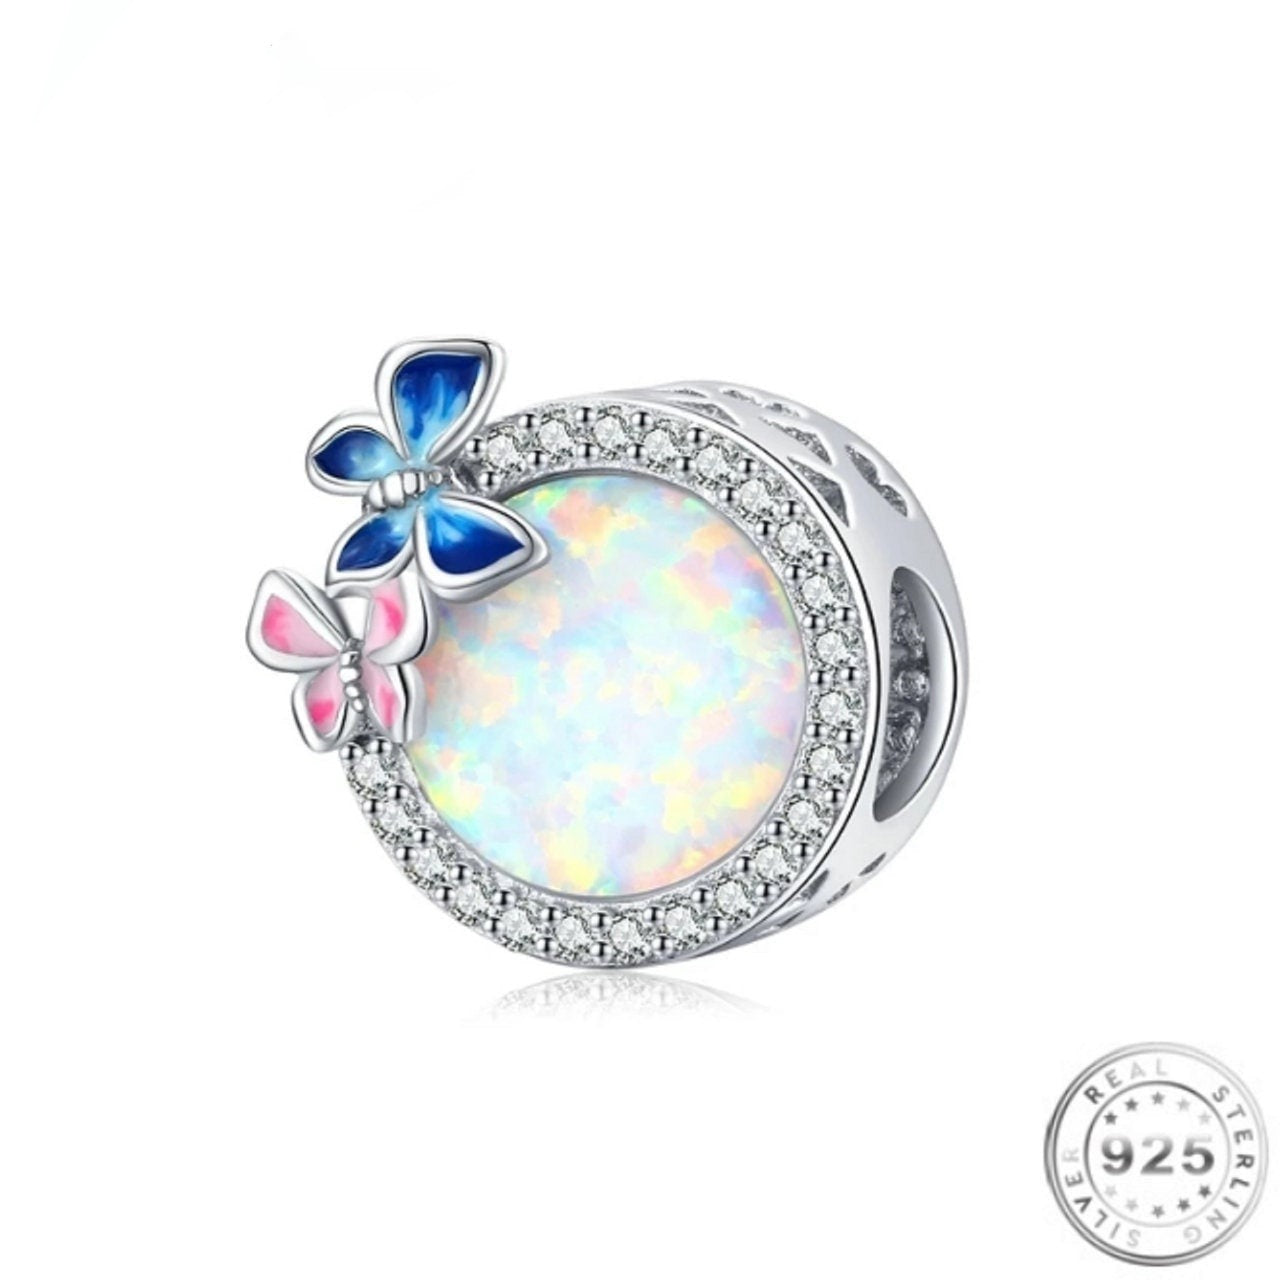 Opal & Butterfly Charm 925 Sterling Silver fits pandora